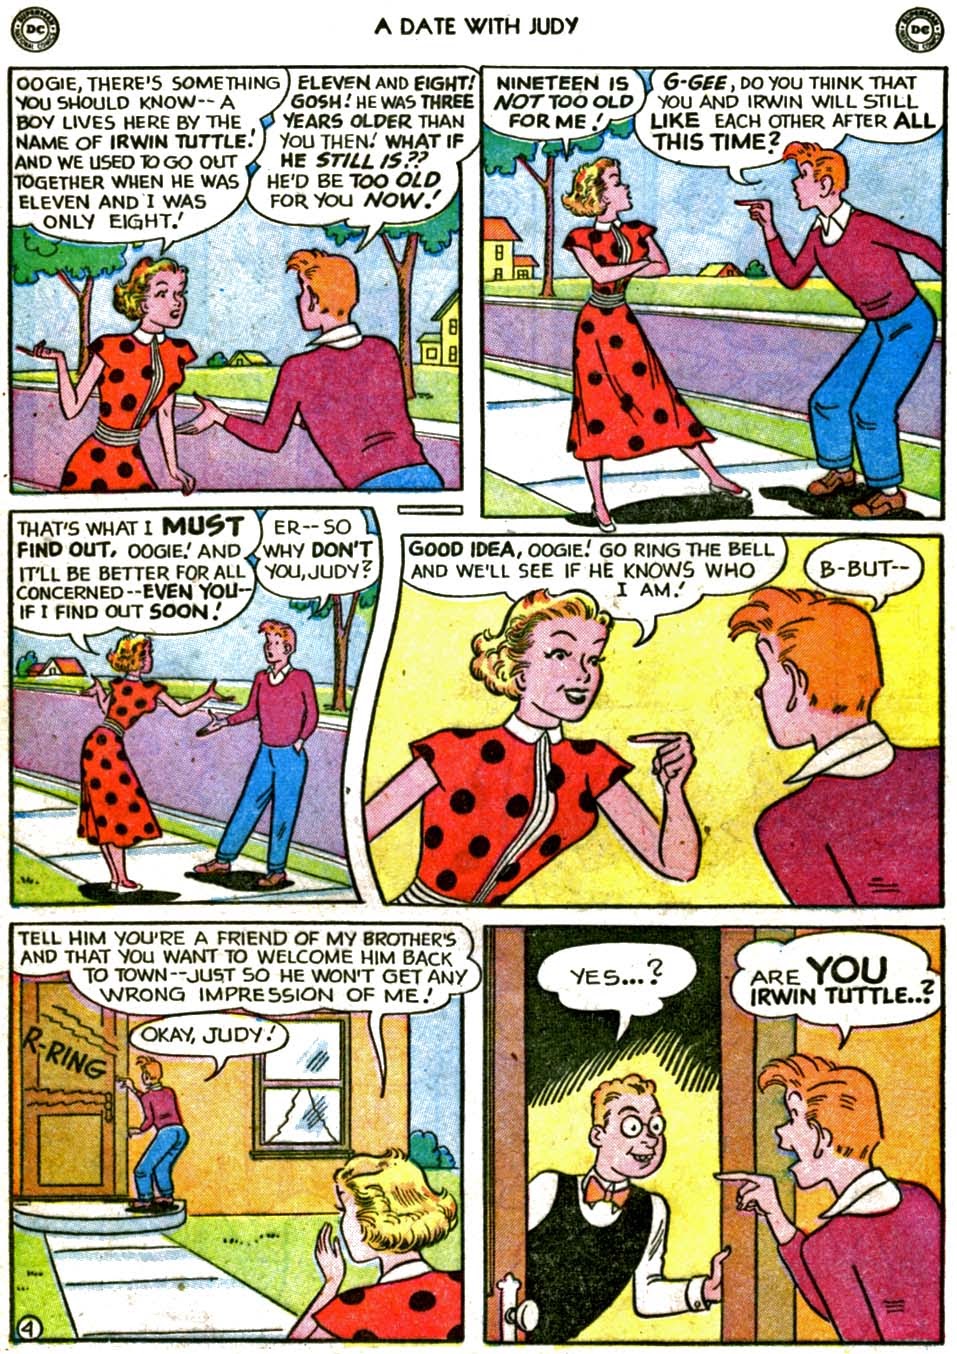 Read online A Date with Judy comic -  Issue #16 - 22